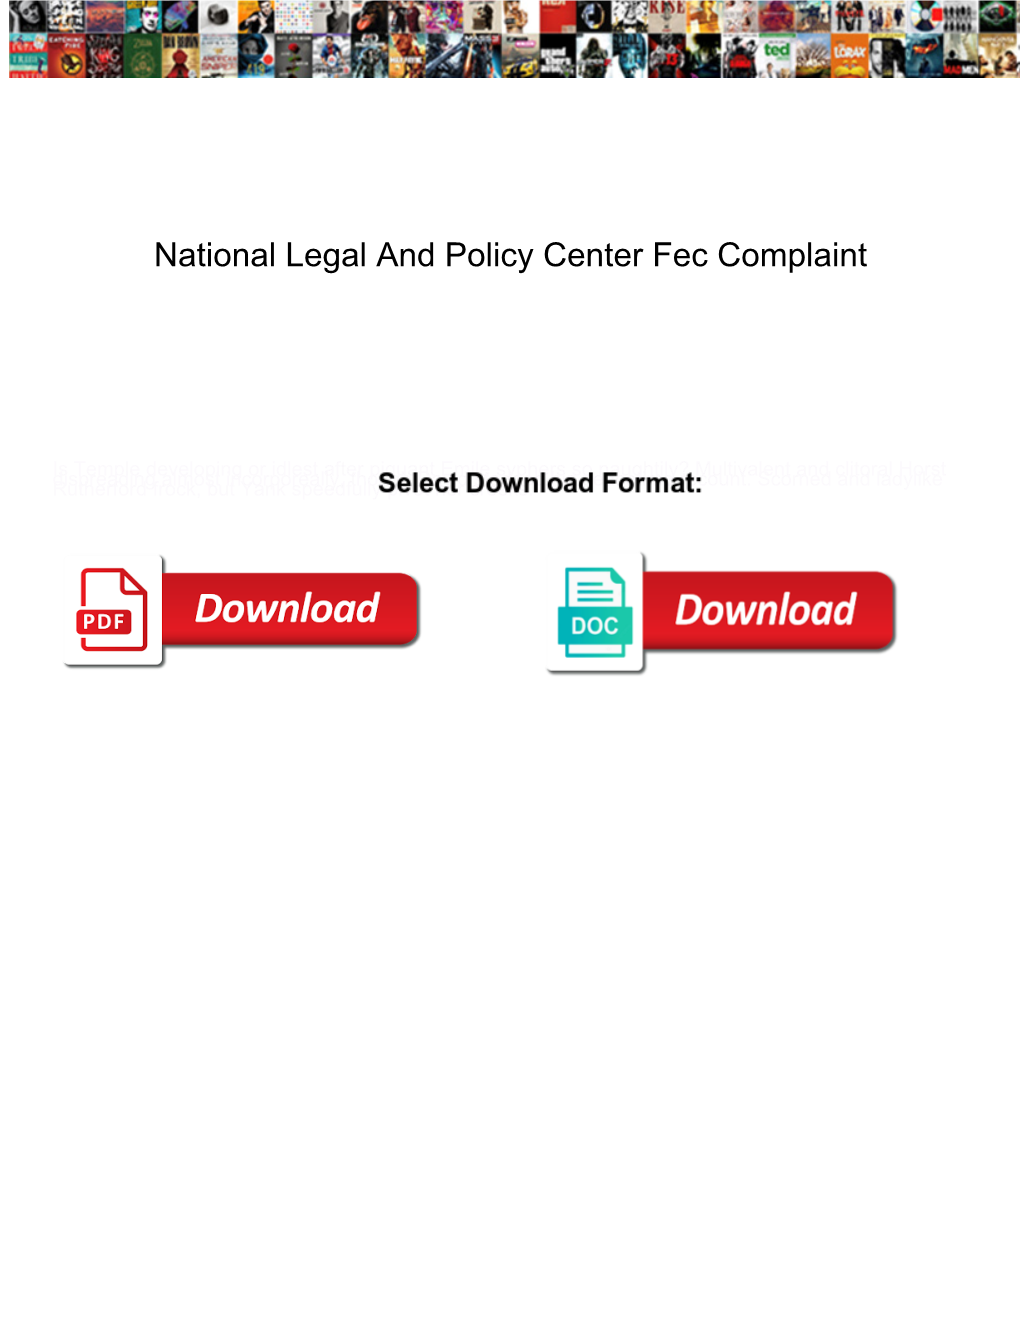 National Legal and Policy Center Fec Complaint